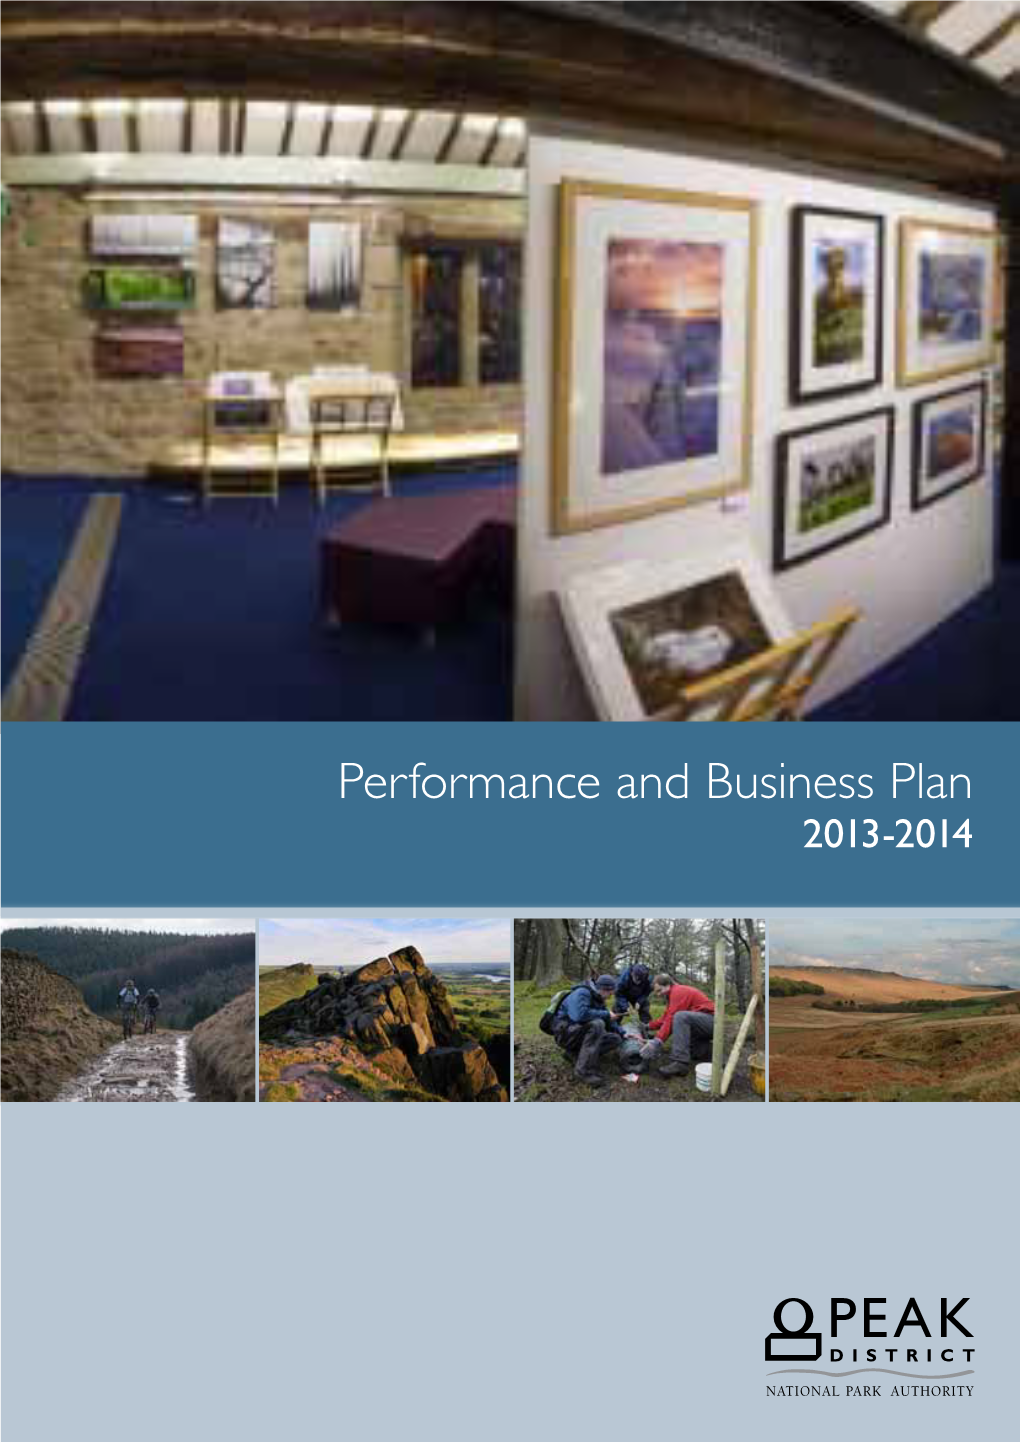 Performance and Business Plan 2013-2014 © 2013 Peak District National Park Authority Aldern House Baslow Road Bakewell Derbyshire DE45 1AE